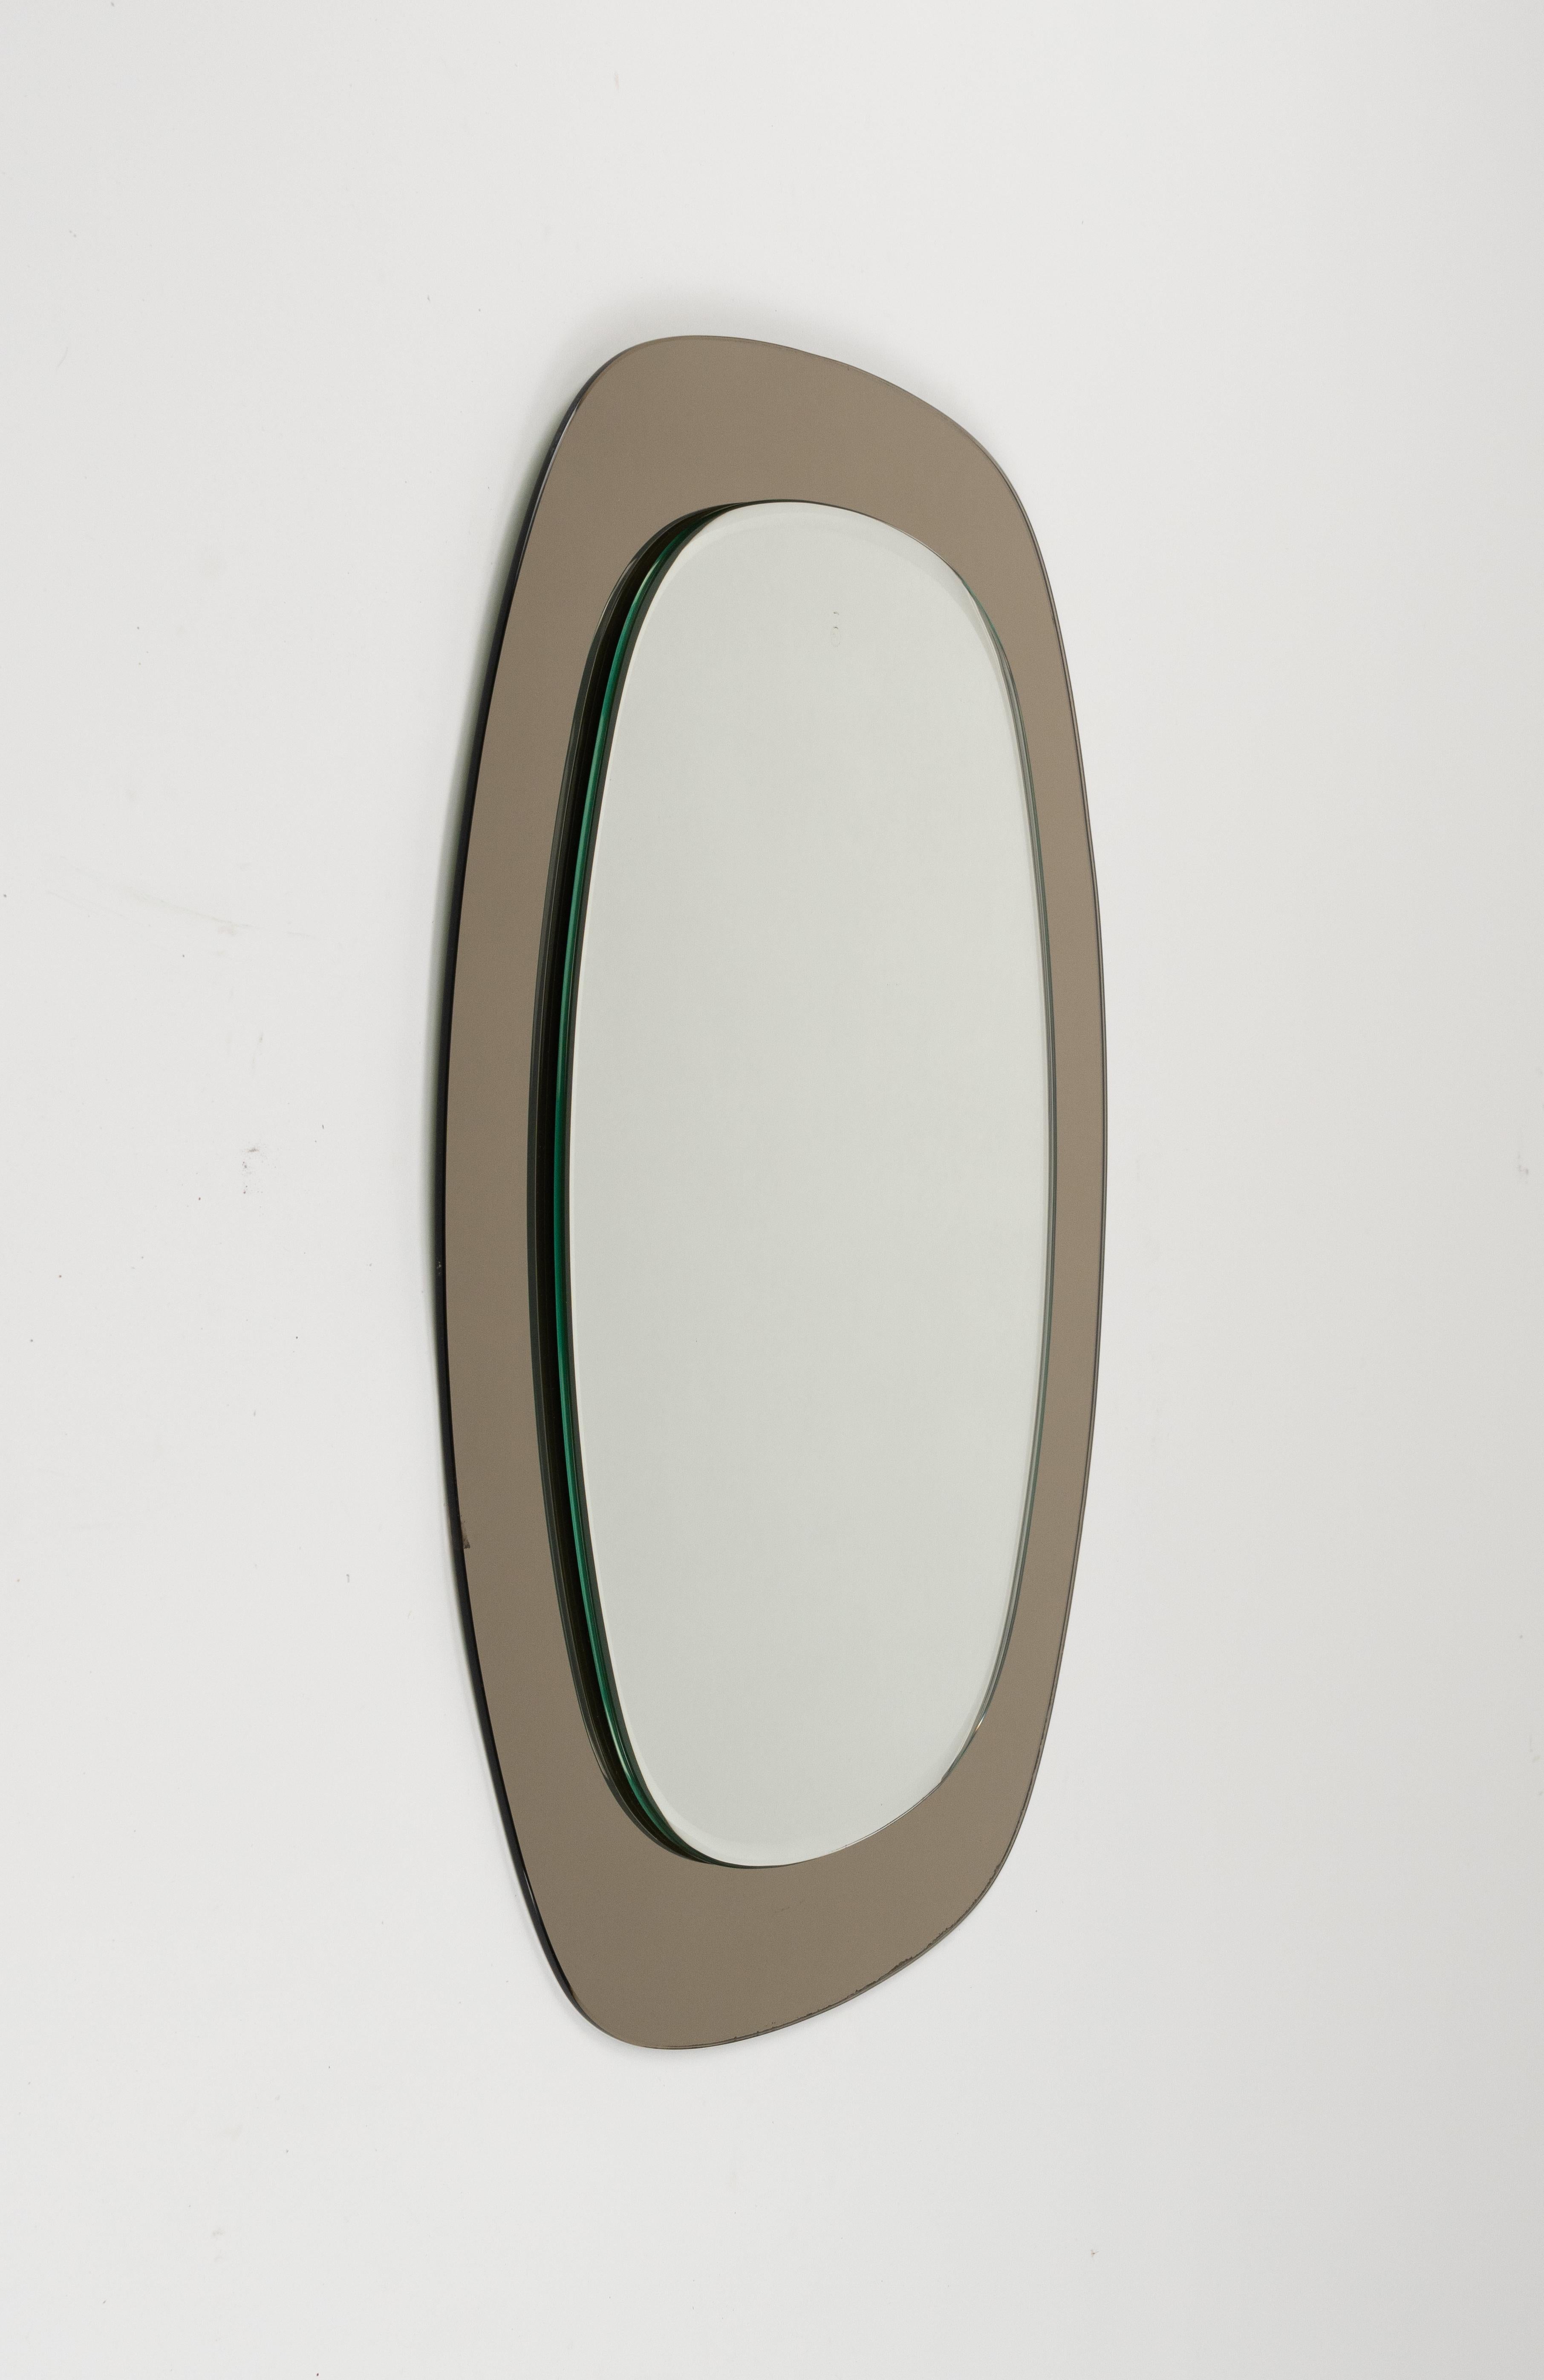 Midcentury beautiful double-level oval wall mirror with a smoked glass frame attributed to Cristal Art.   

Made in Italy in the 1960s.  

The mirror, original of the period, shows small signs of discolouration.